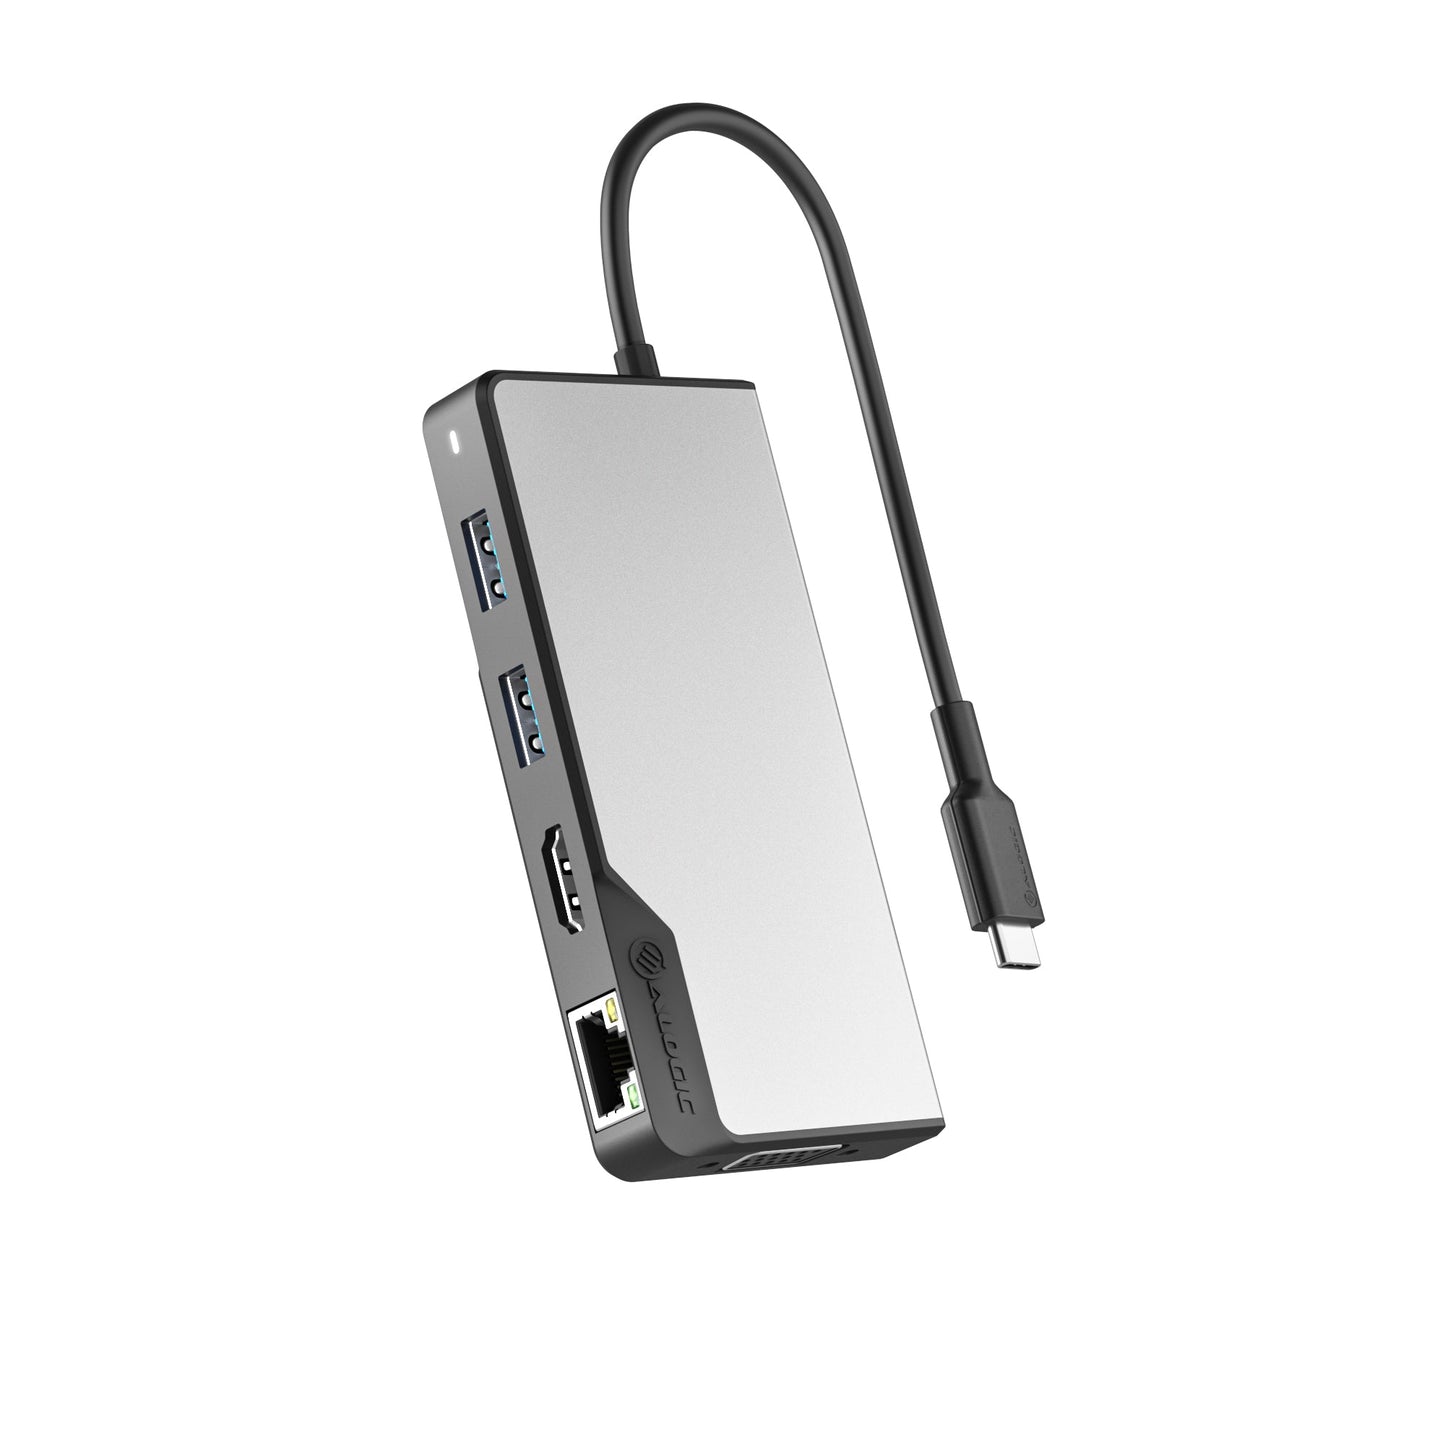 Alogic Usb-c Fusion Max Hub, 6-in-1 Type C Adapter, 4k Hdmi, Vga, Usb A 3.1 With 100w Power Delivery, Usb A 3.1, Gigabit Ethernet, Compatible With Macbook Pro/air And Ipad Pro/air